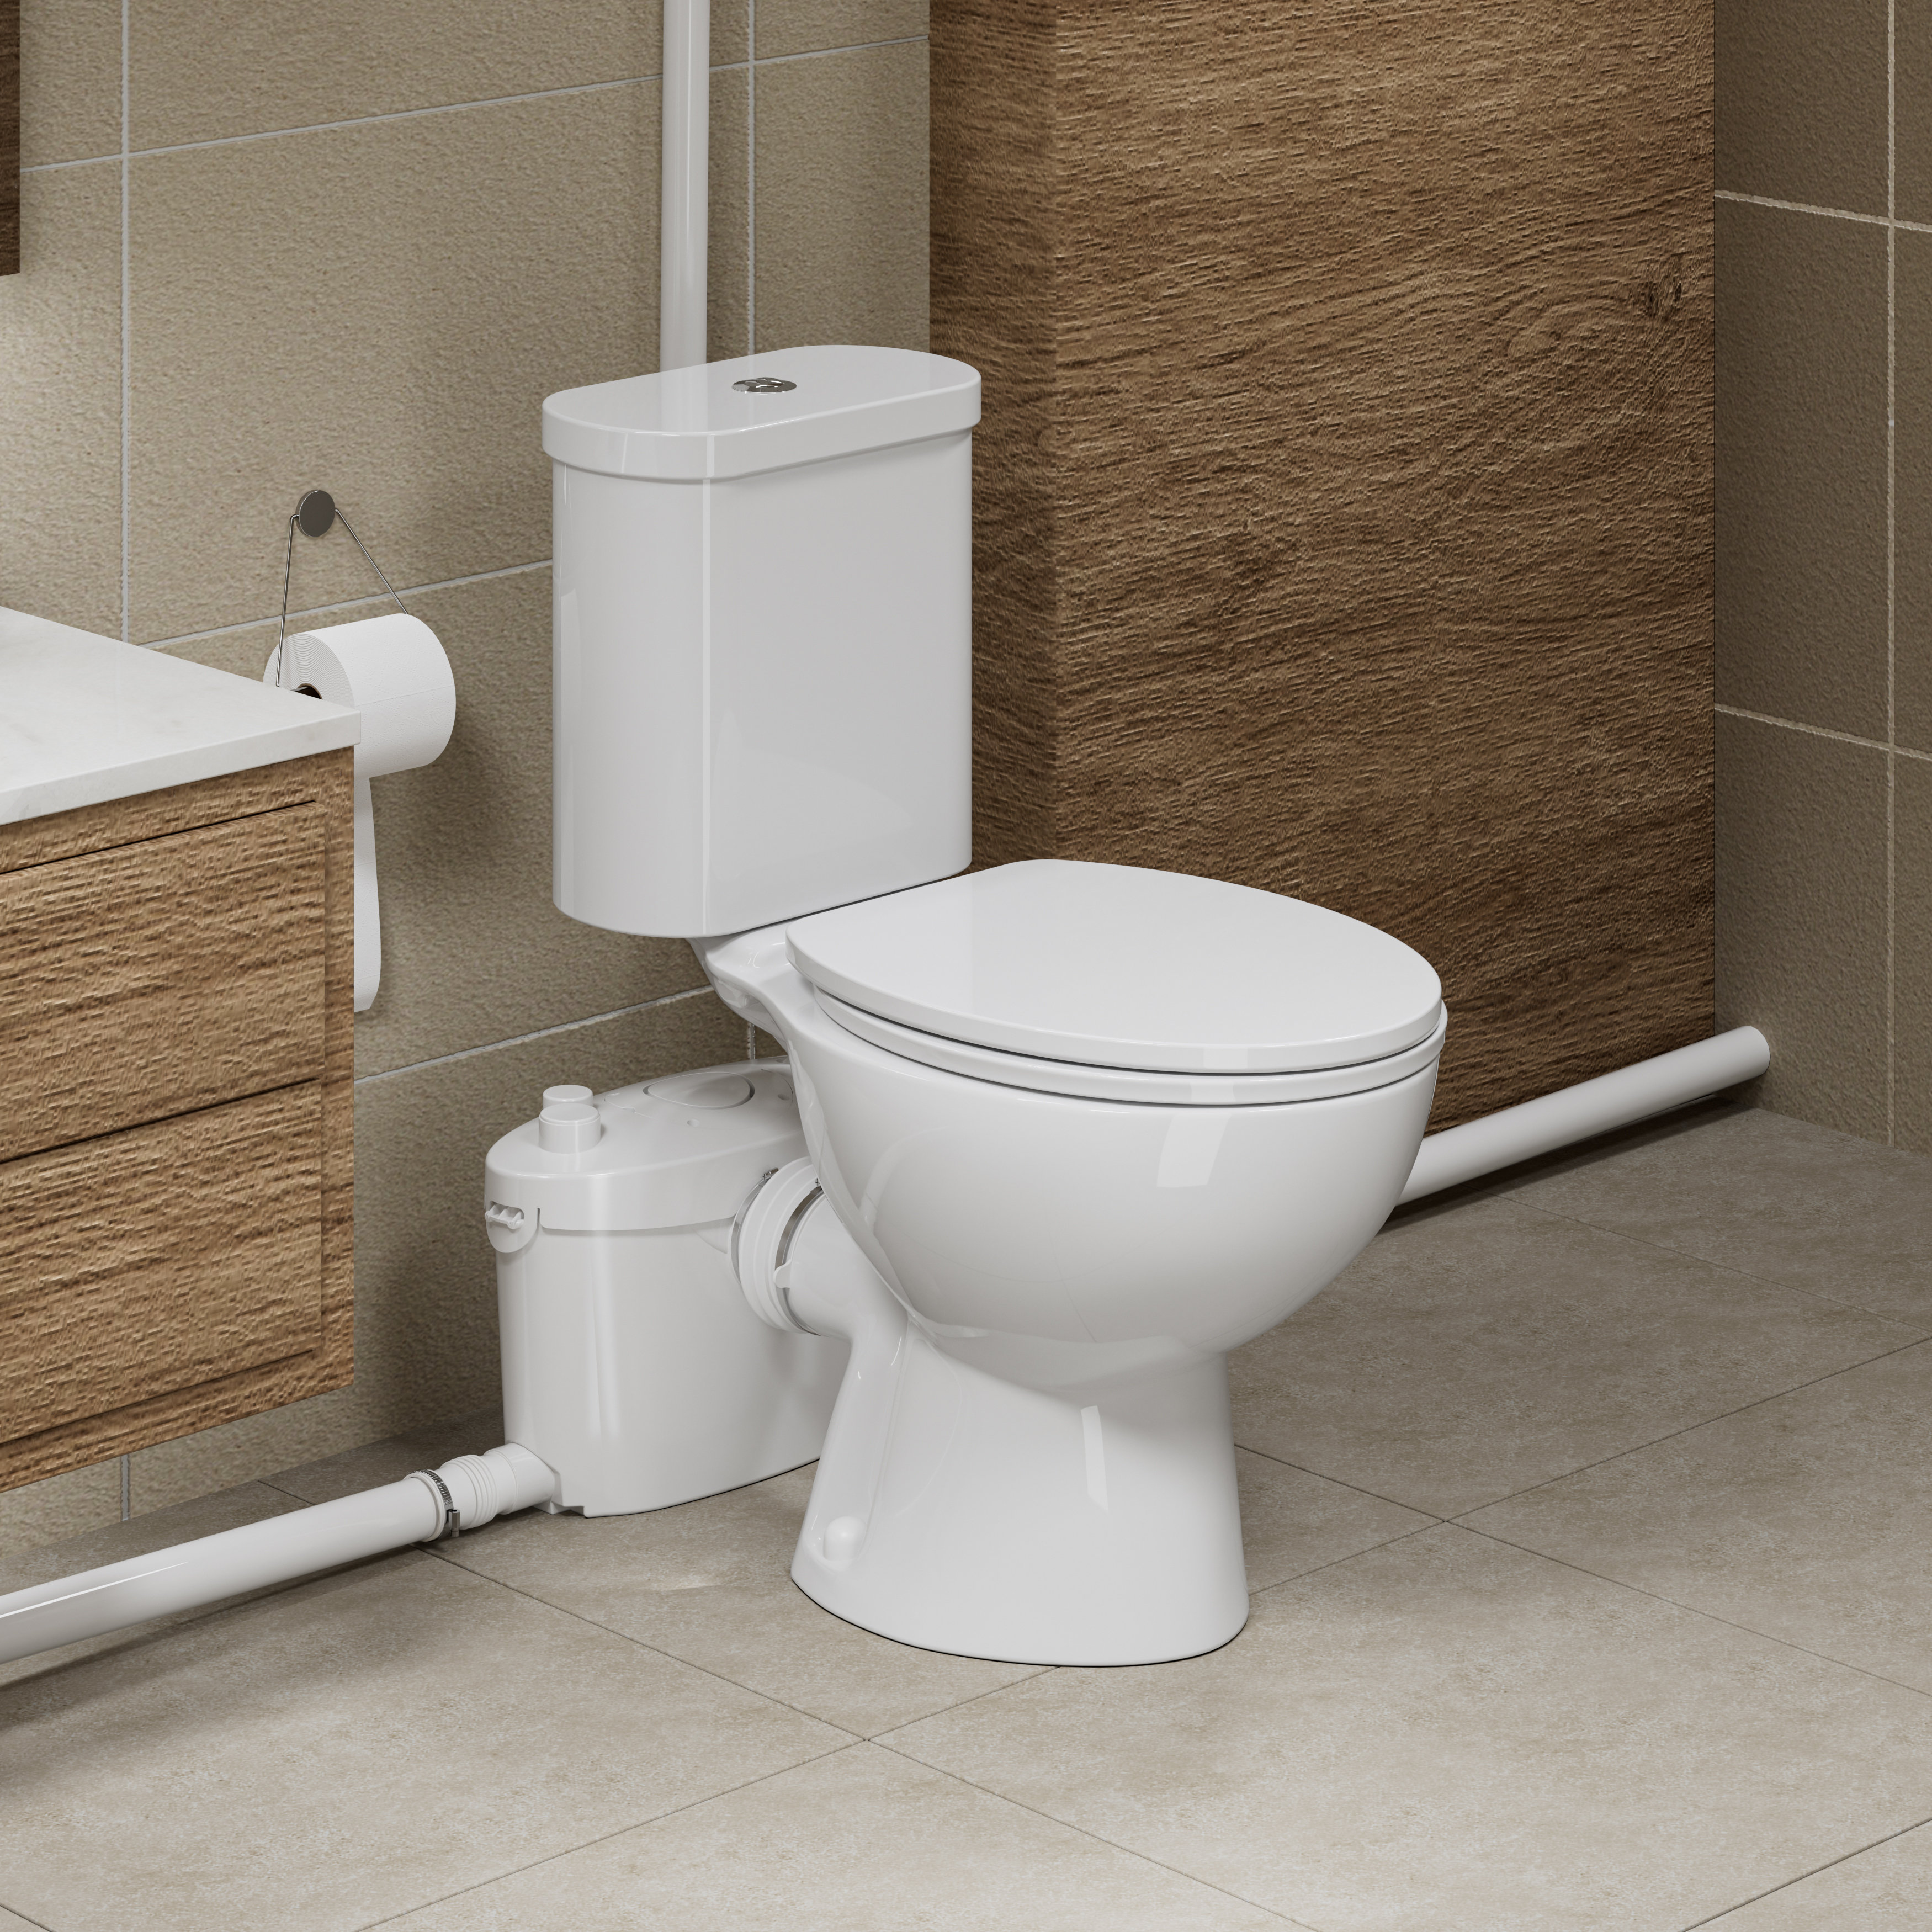 850W Upflush Macerating Toilet with Bidet Sprayer For Basement,Toilet with  Macerator Pump Toilet with AC Vent & 4 Water Inltes with Water Tank, Toilet